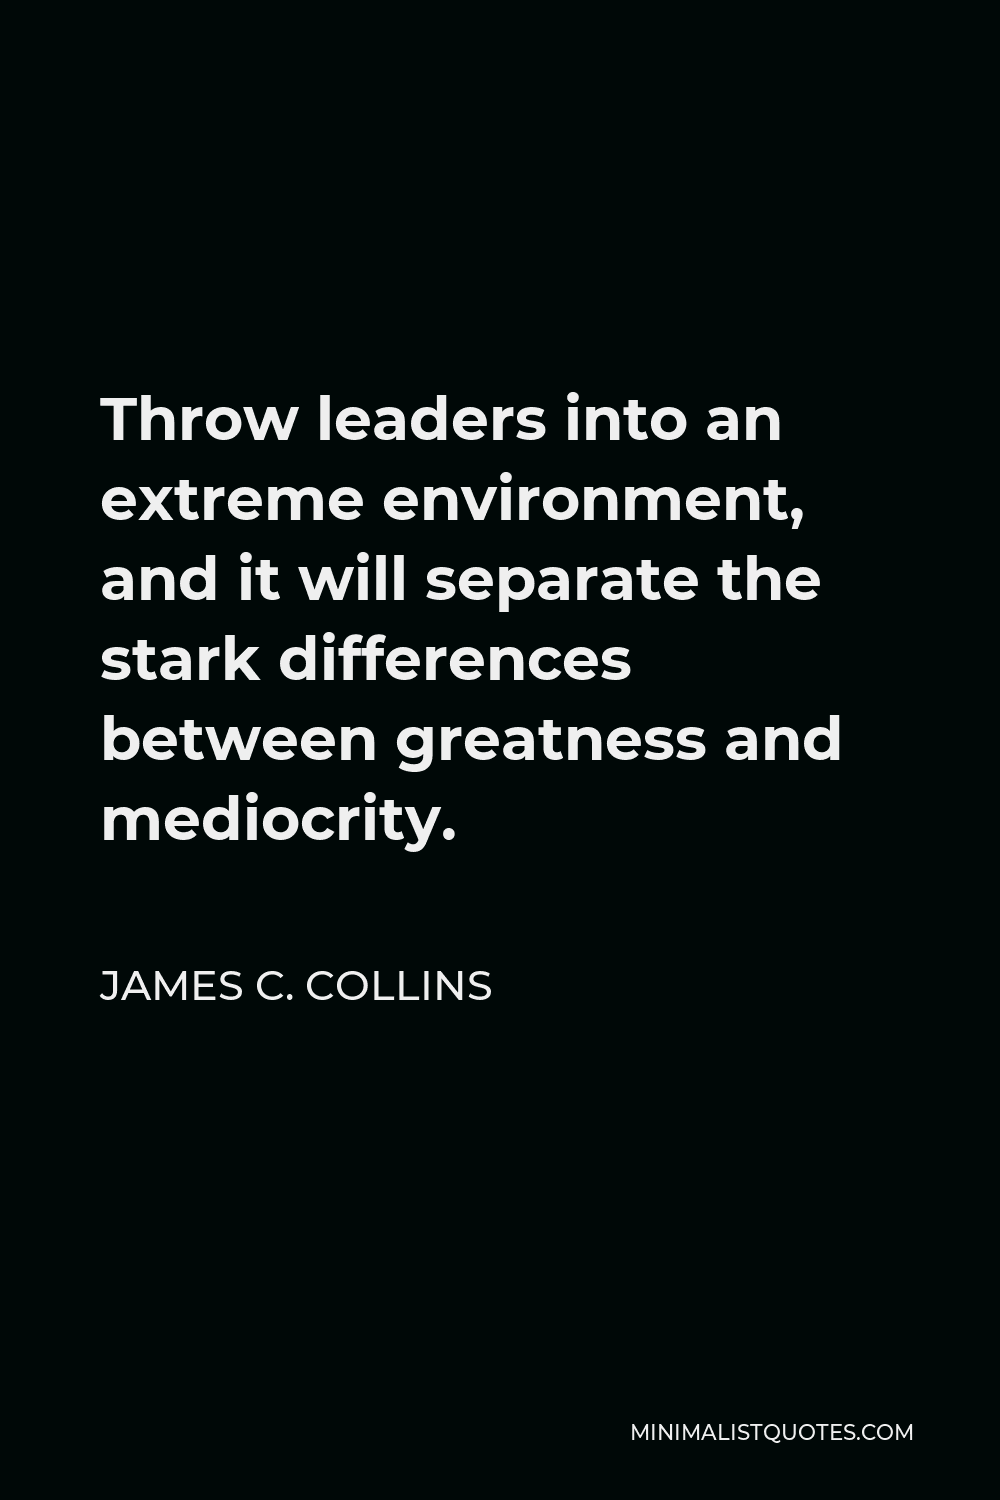 James C. Collins Quote - Throw leaders into an extreme environment, and it will separate the stark differences between greatness and mediocrity.